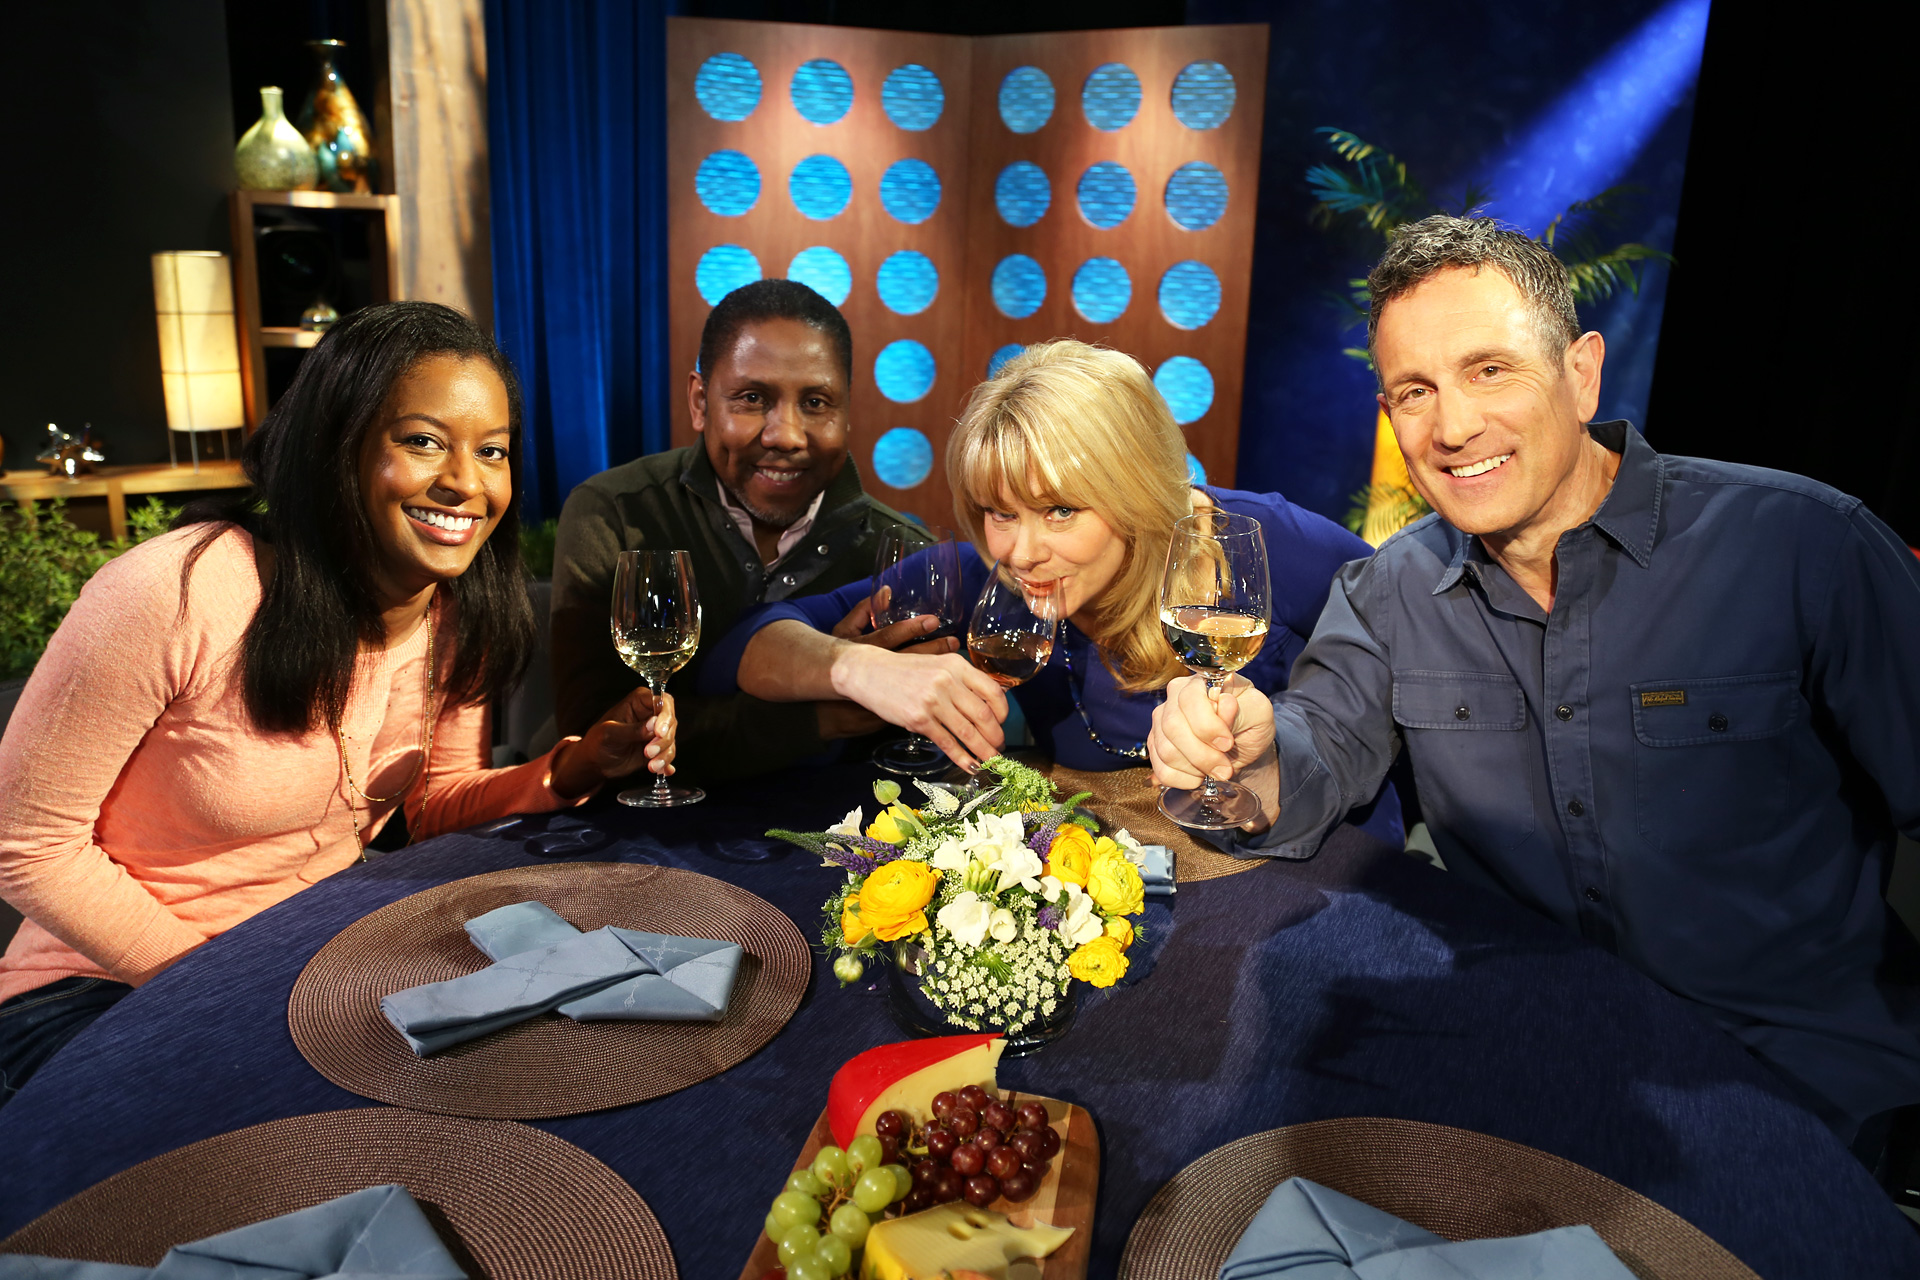 Host Leslie Sbrocco and guests on the set of the episode 6 of season 11.